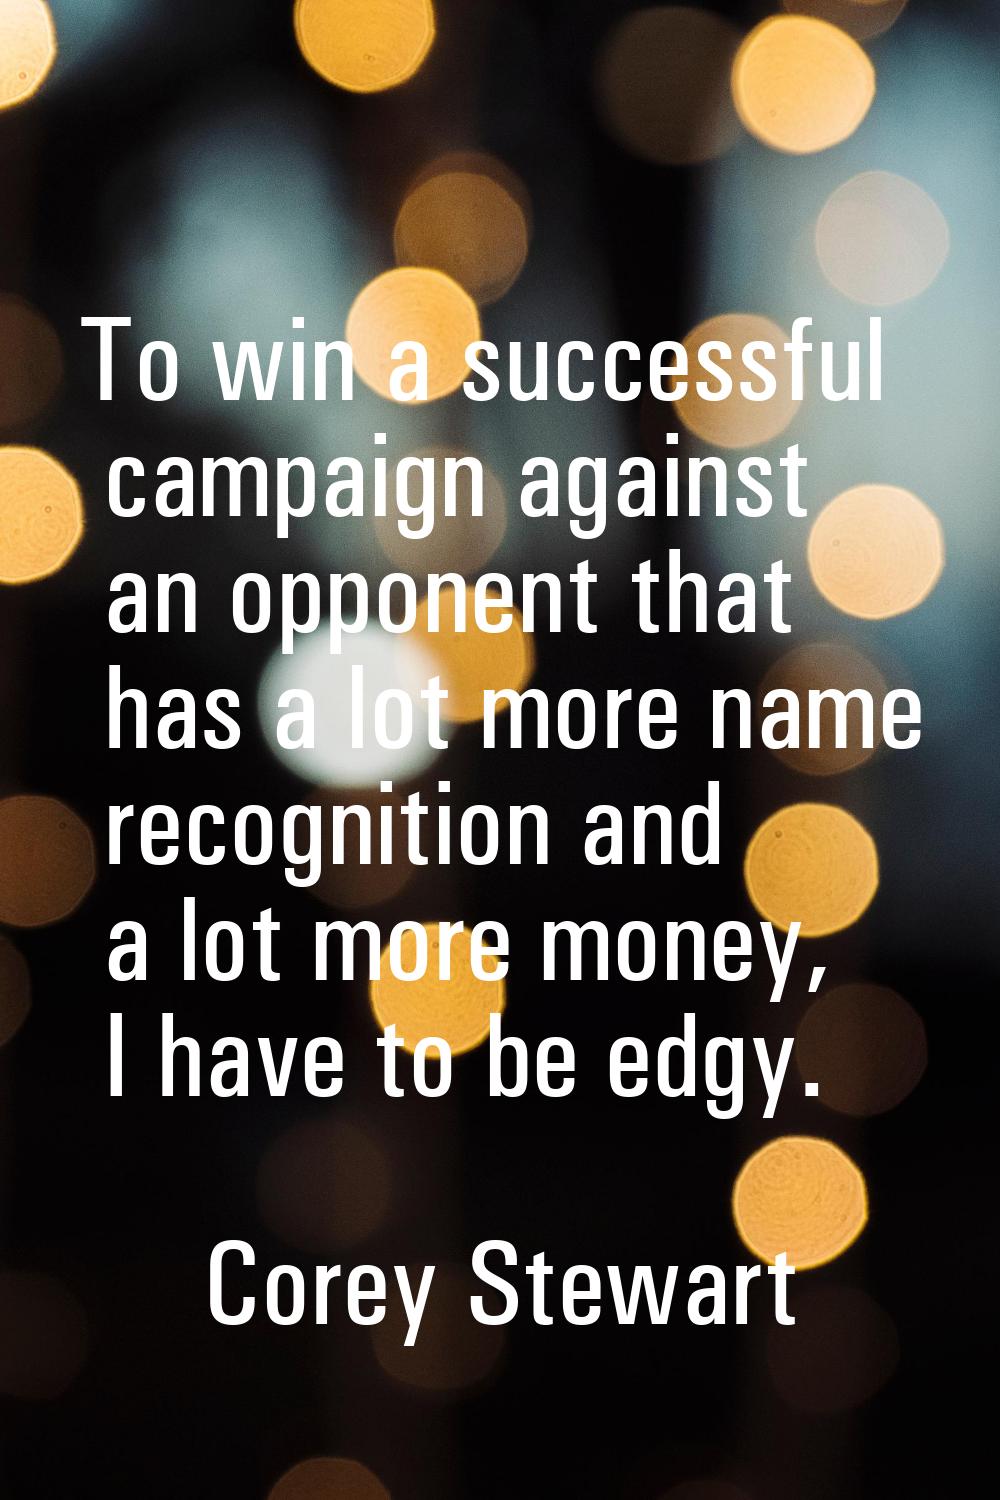 To win a successful campaign against an opponent that has a lot more name recognition and a lot mor